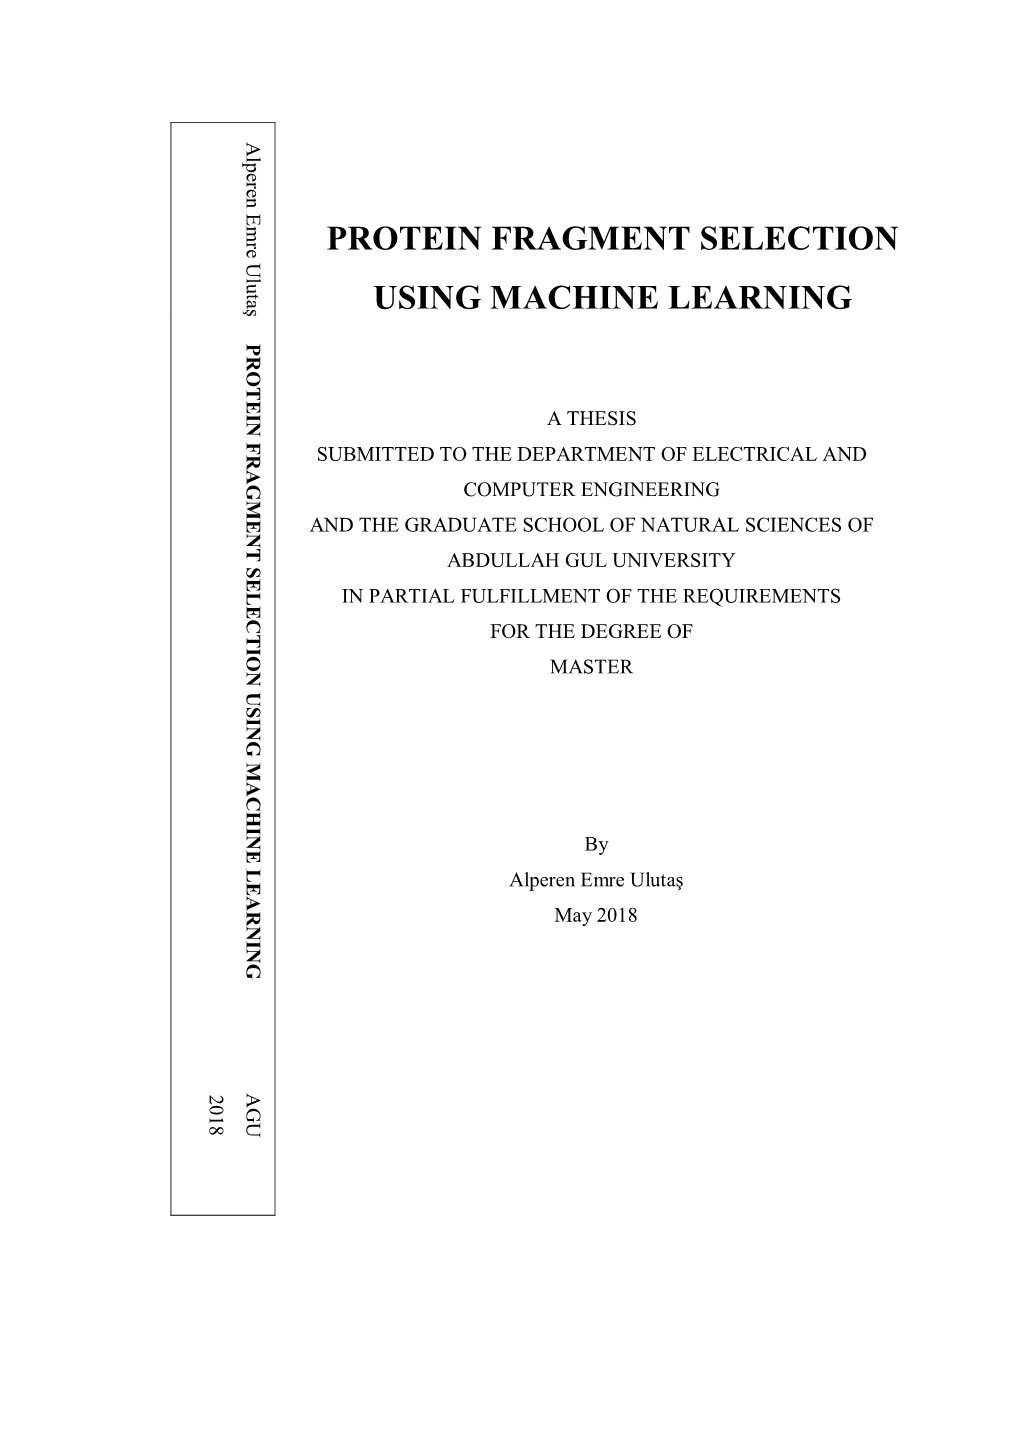 Protein Fragment Selection Using Machine Learning